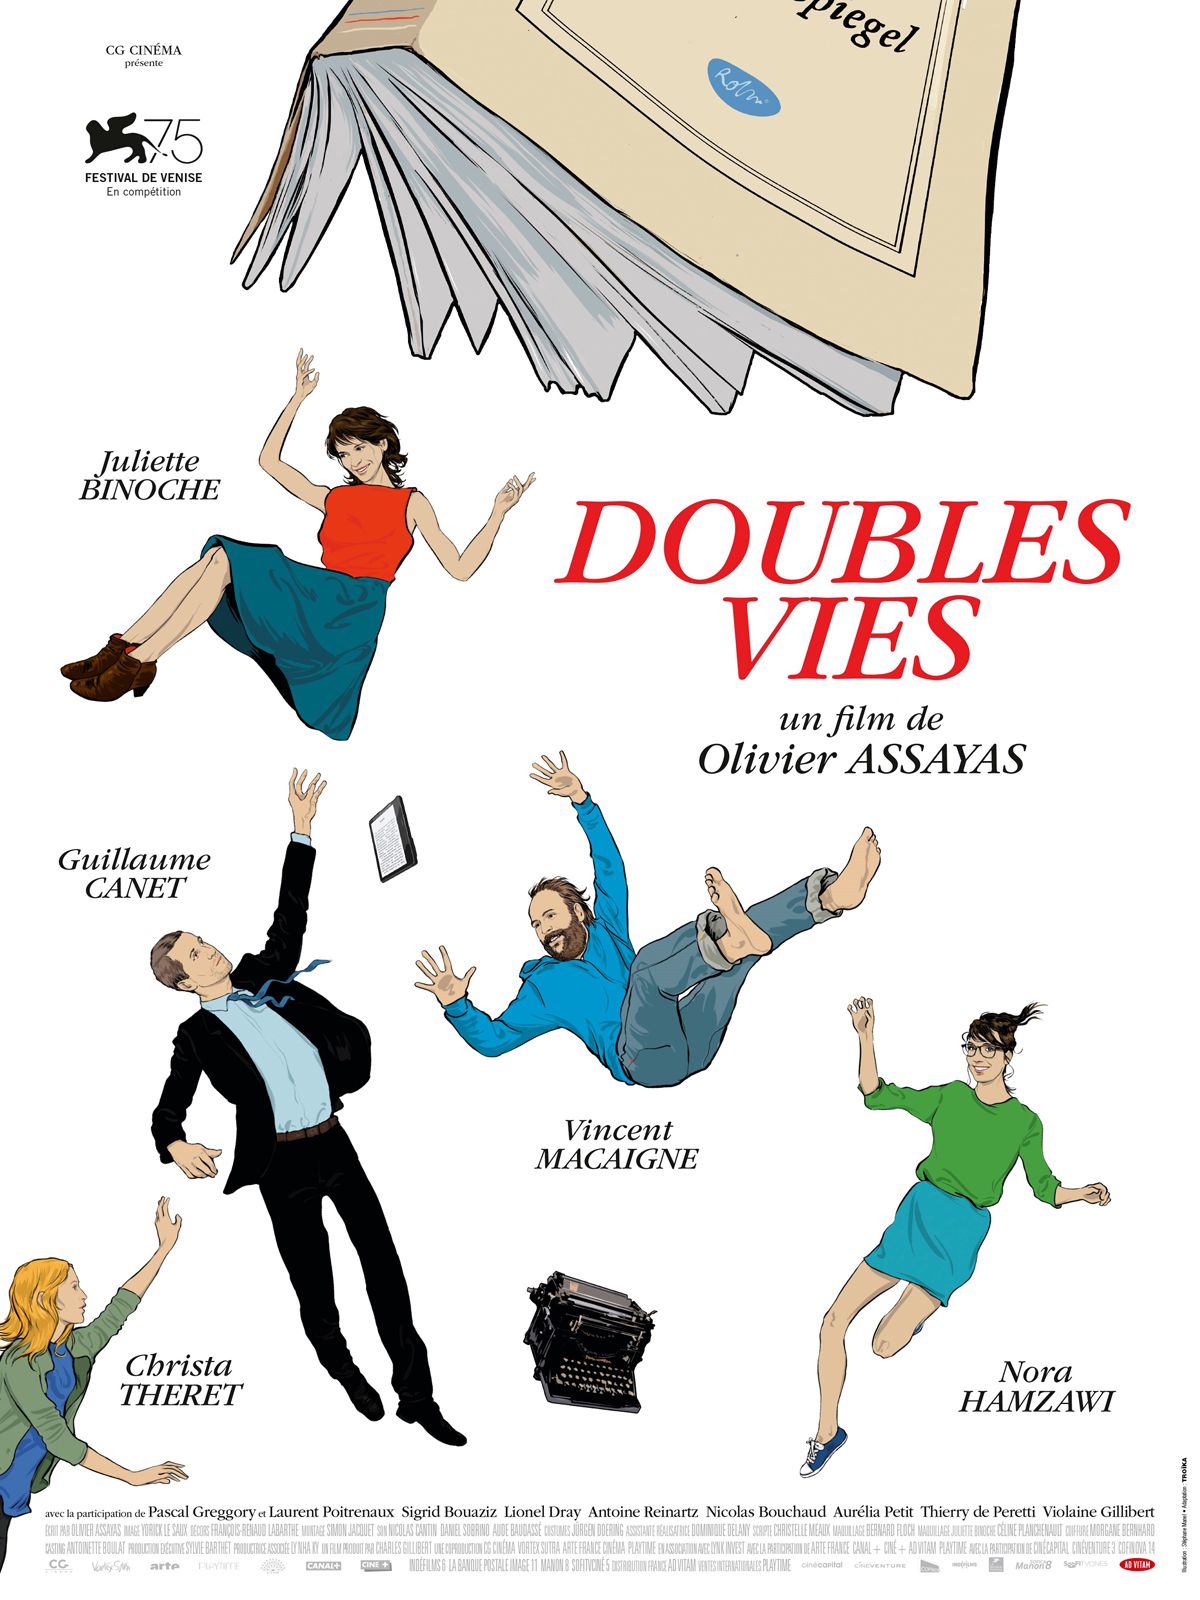 Doubles vies - Film (2019) streaming VF gratuit complet